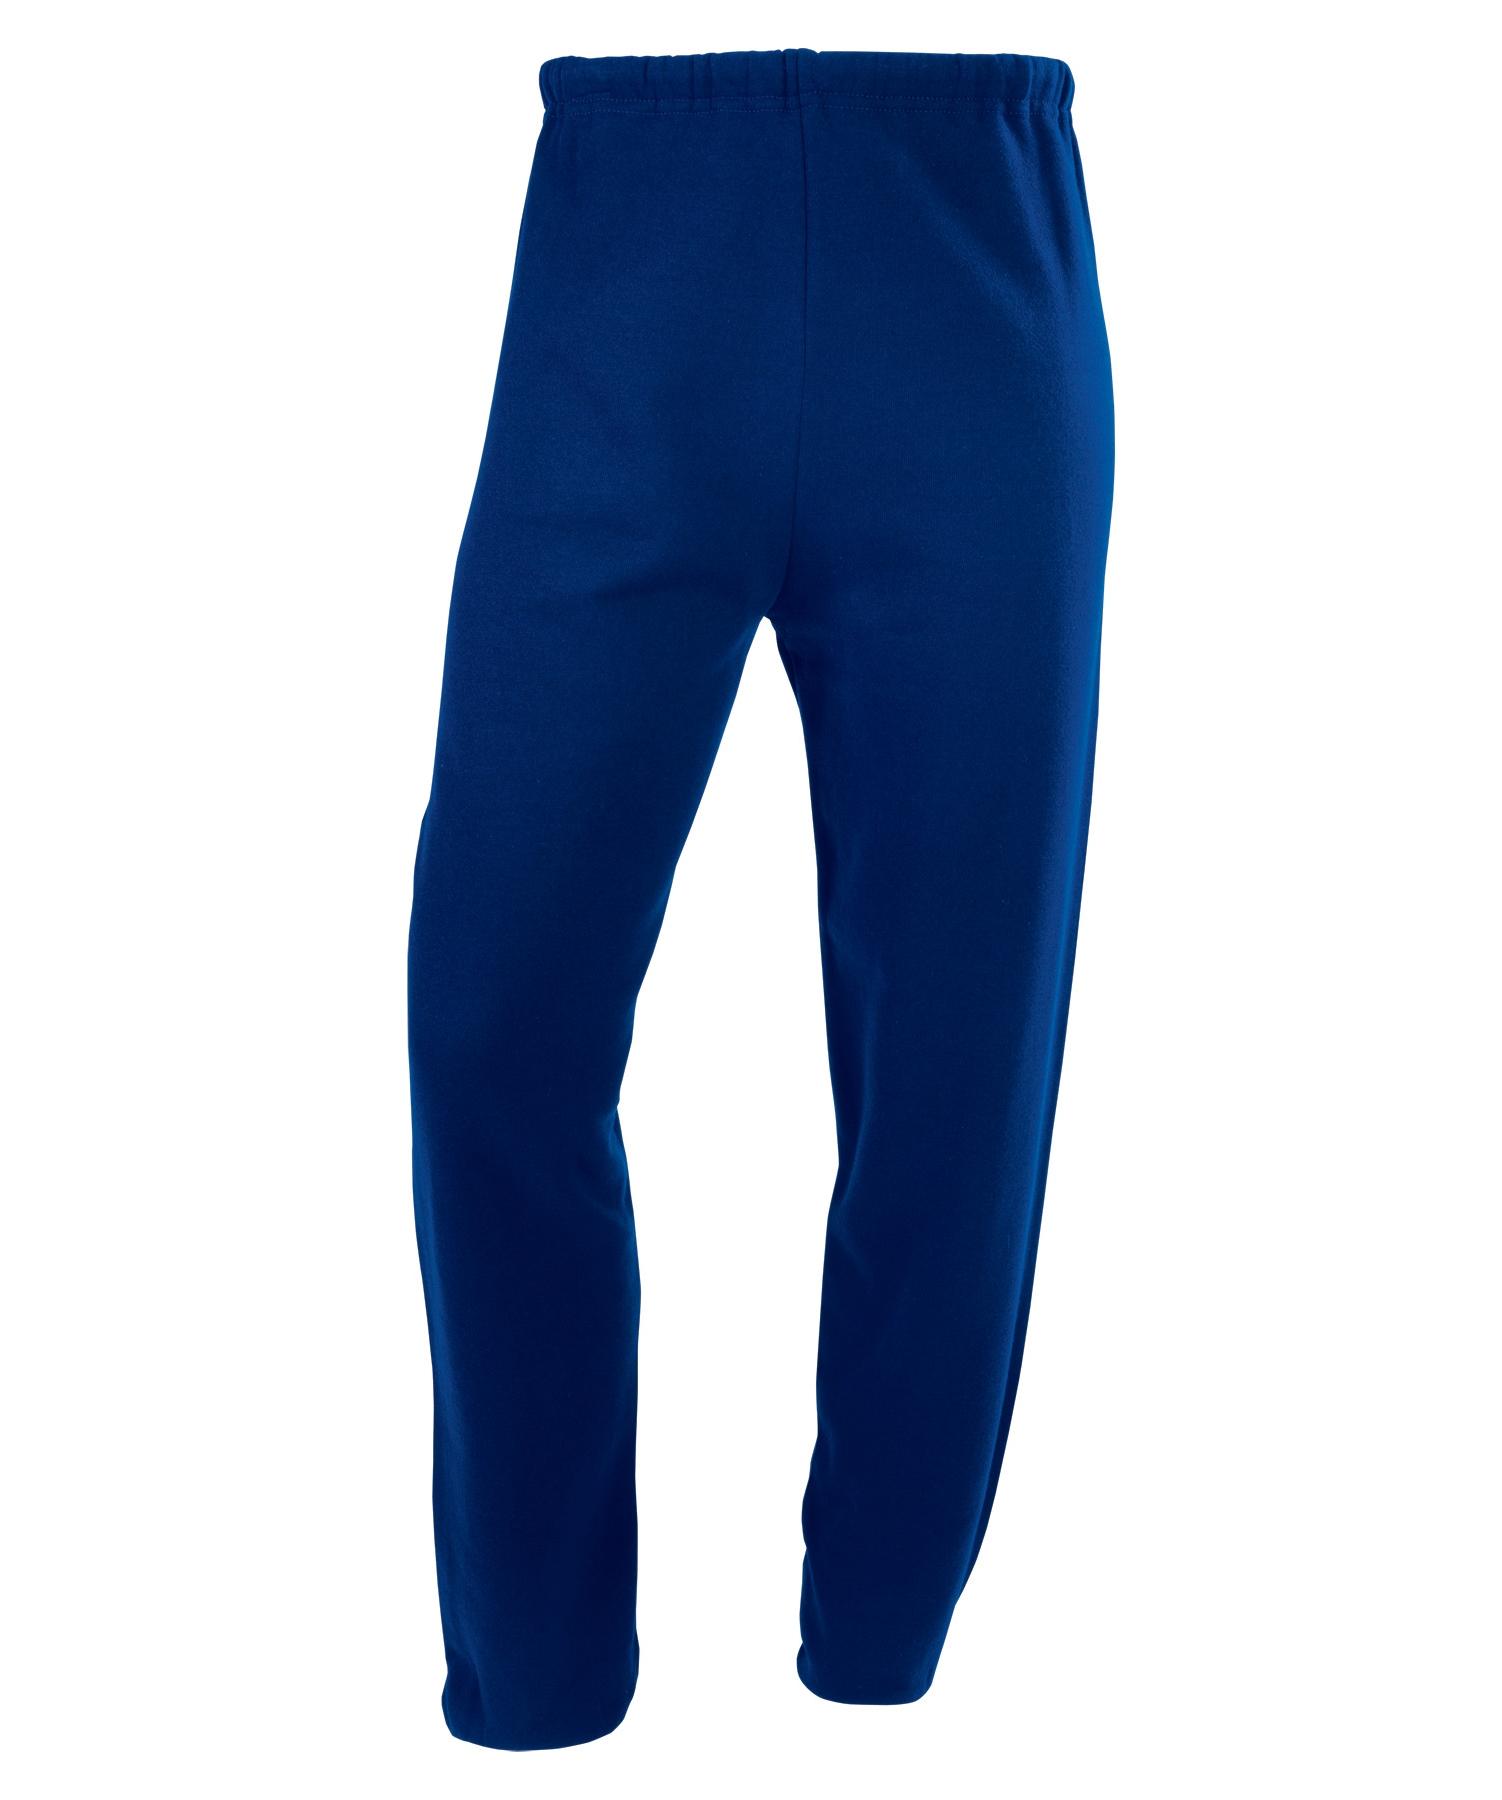 Russell Athletic DRI-POWER Sweatpant - Newmarket